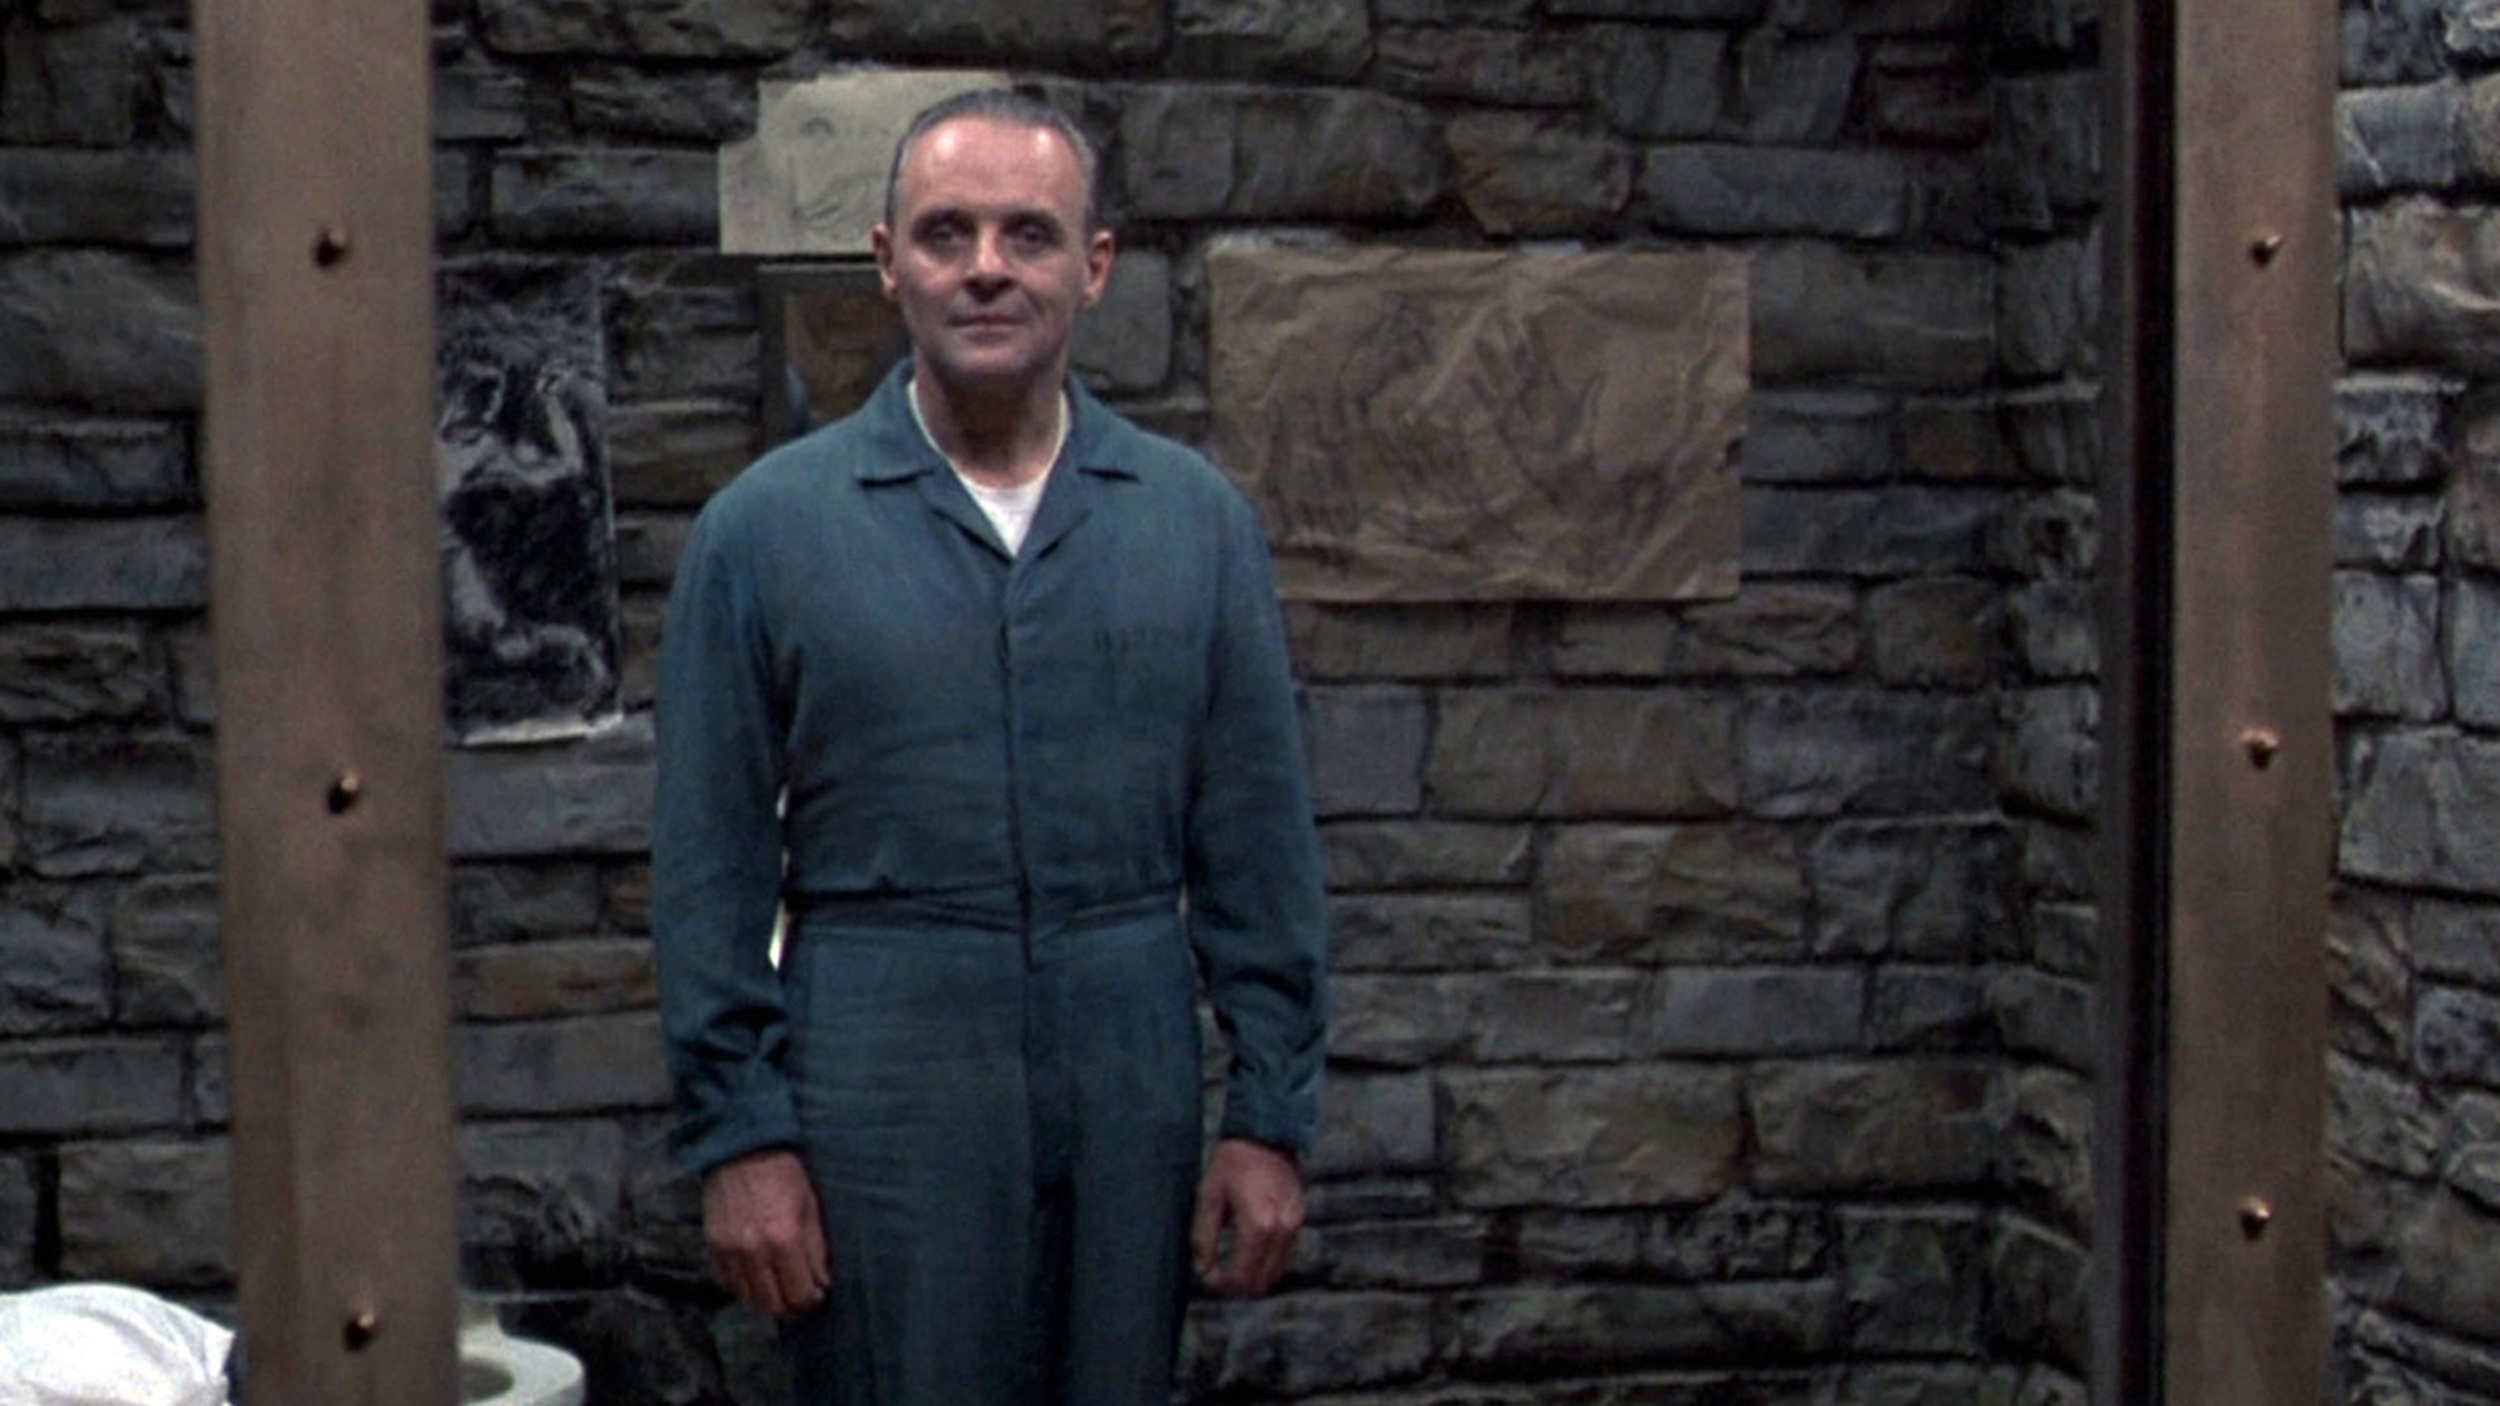 <p>Though the character of Hannibal Lecter is a supporting role in Jonathan Demme’s “Silence of the Lambs," Anthony Hopkins imbued him with such charismatically erudite menace that he won Best Actor at the 1992 Academy Awards, and not a single sensible individual complained. Lecter was, at the time, a one-of-a-kind monster; you were drawn to him, and you desperately wanted his approval. So did Jodie Foster’s Clarice Starling, though she was smart enough to know his endearment was an invitation to slaughter. That’s what made Ridley Scott’s “Hannibal” so fascinating: Knowing that Lecter is out in the real world, regardless of his promise at the end of “Silence" is like having tangible proof that the devil exists. “Red Dragon” is a moron’s version of “Manhunter."</p>